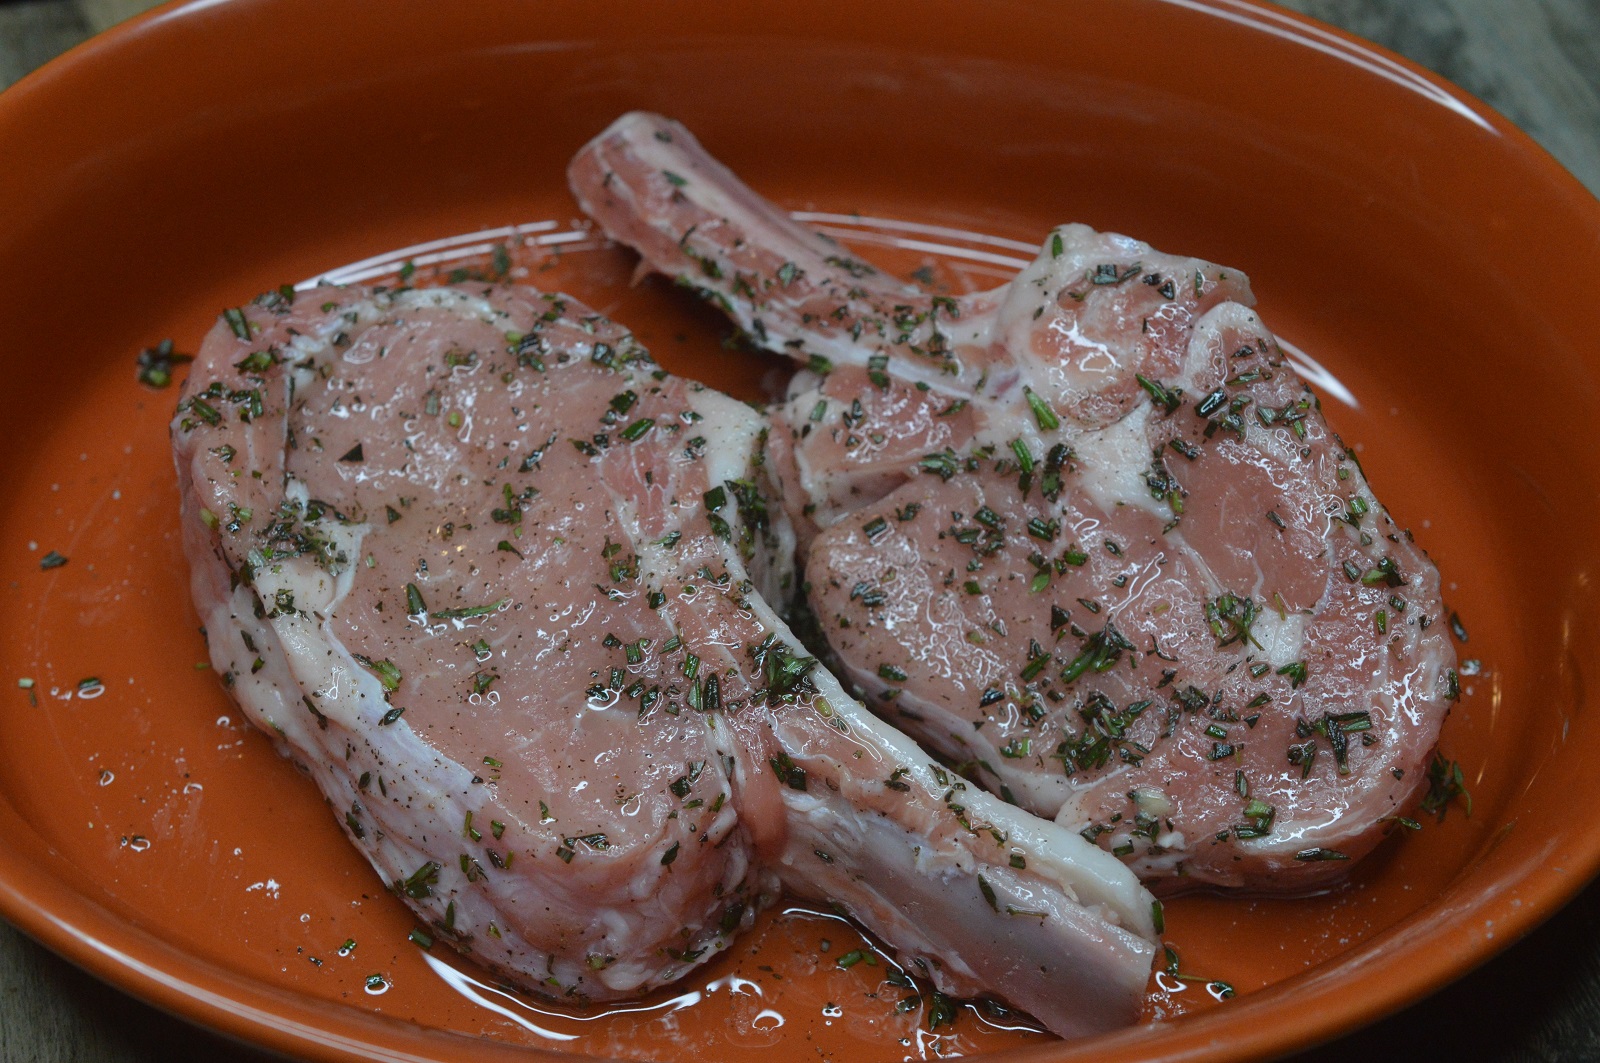 Pan Fried Veal Chops with White Wine Sauce